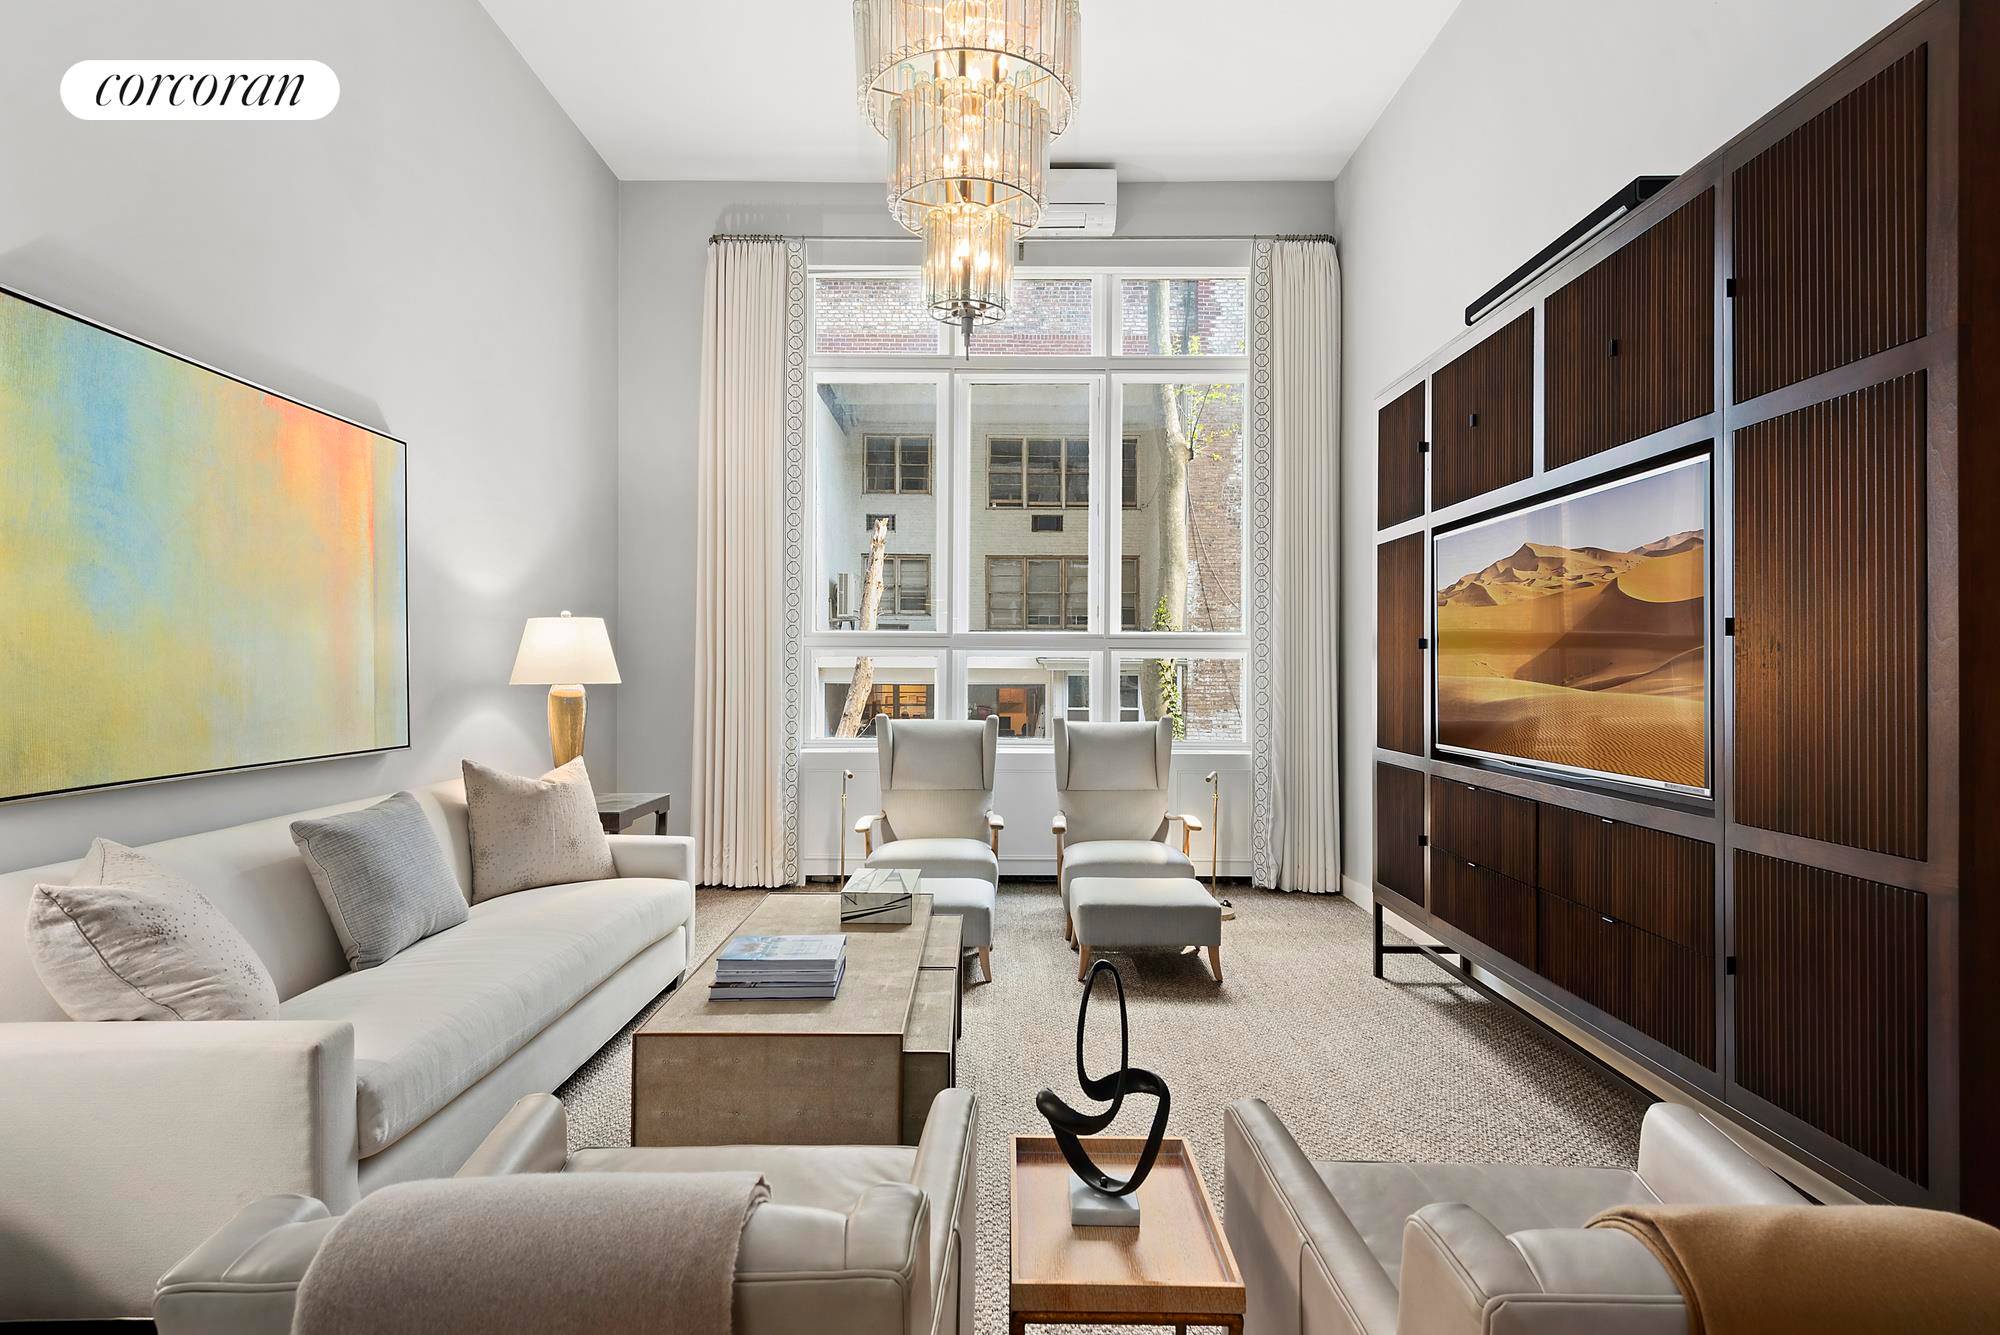 Exquisitely designed with classic yet modern elegance no detail has been overlooked within this stunning West Village luxury rental.